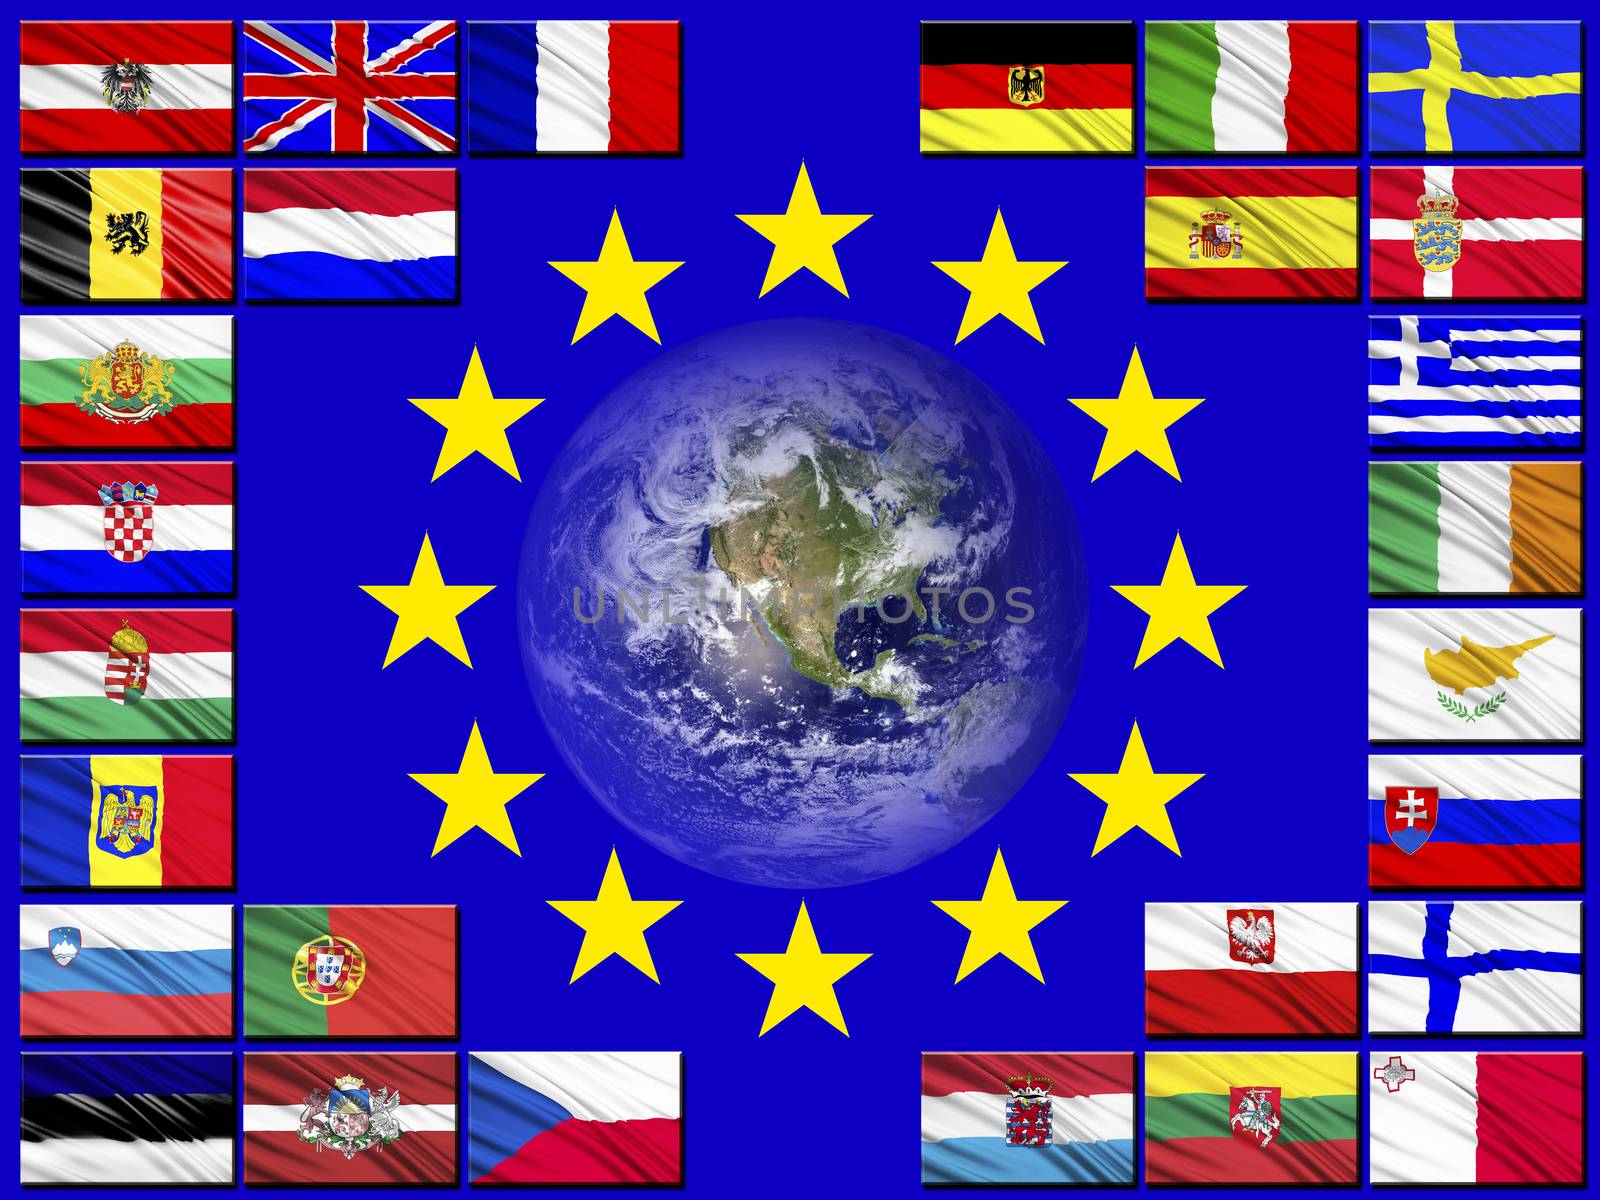 Flags of the countries of the European Union against the background of the flag of the EU